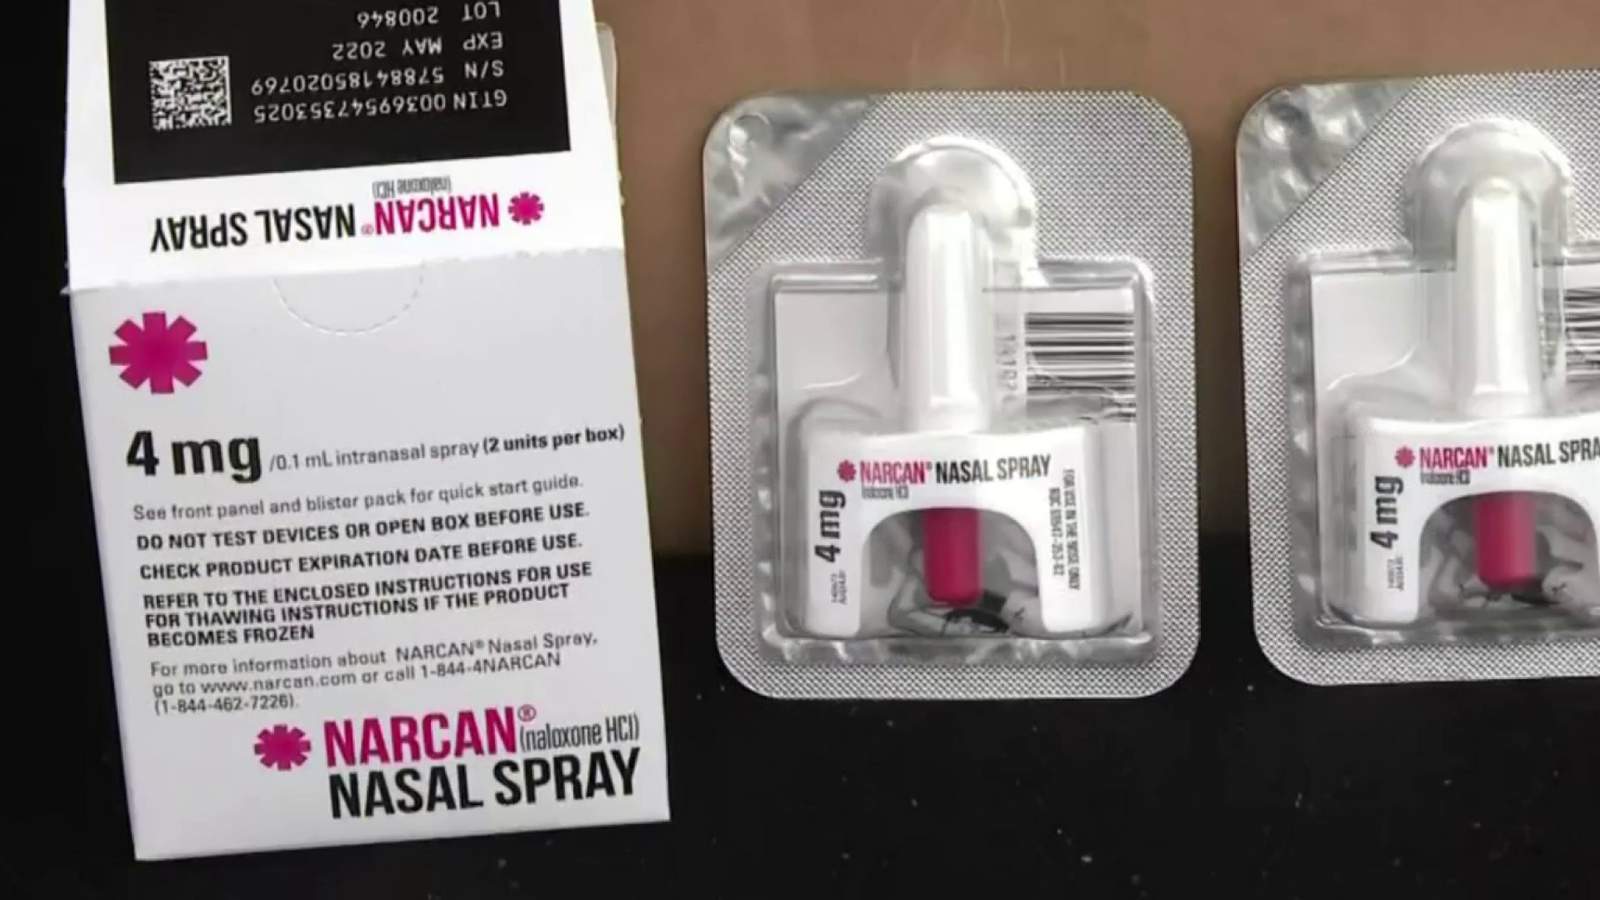 Oakland County to host free drive-thru Narcan training